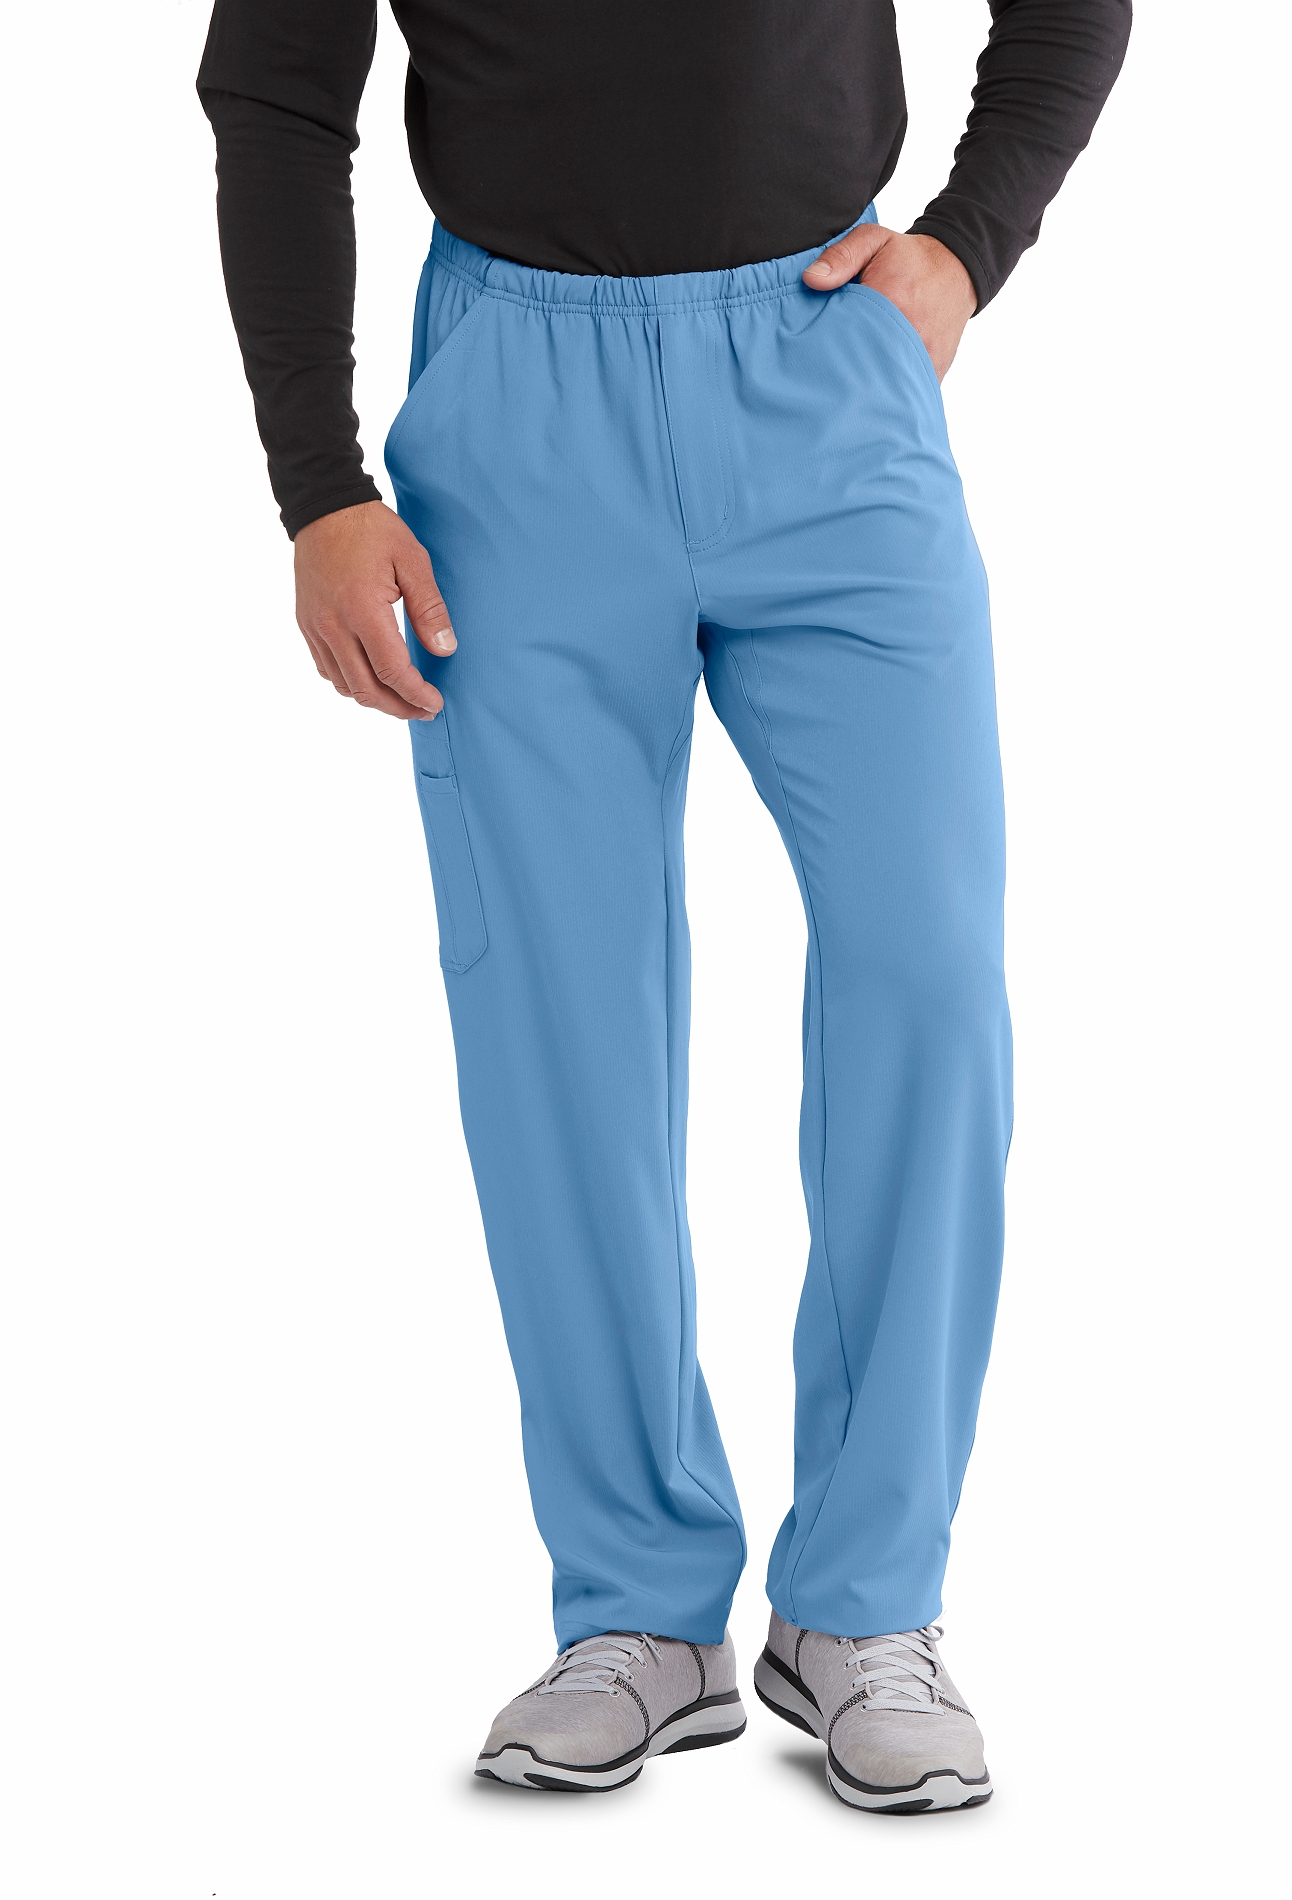 Clearance Scrub Sets: (3XL Tall) Beige Unisex Scrubs With 6 Pockets And 1  Pencil Slot